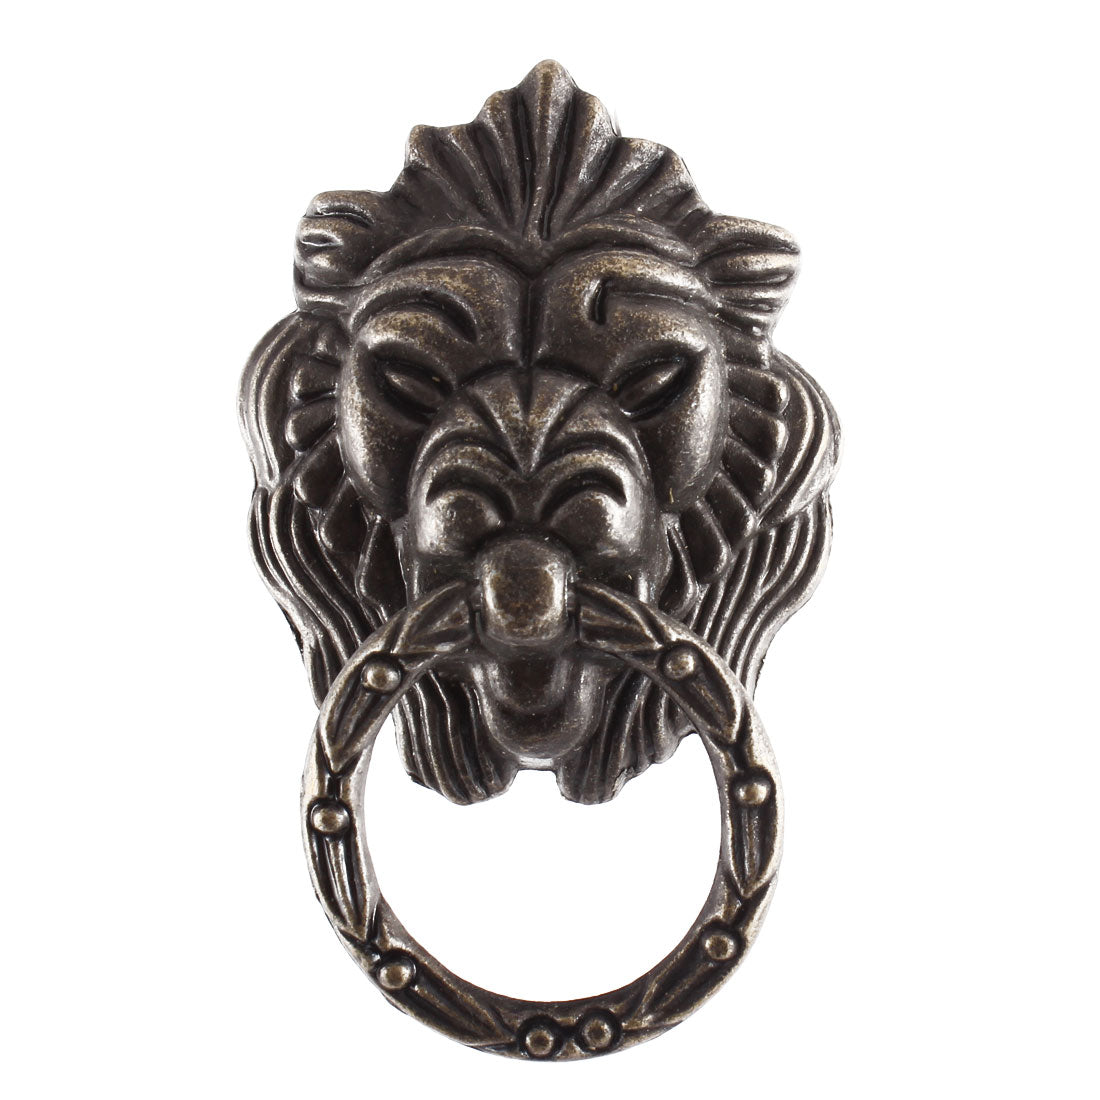 uxcell Uxcell Home Metal Drawers Door Vintage Style Lion Head Chest Knob Pull Handle Bronze Tone 4 Pcs